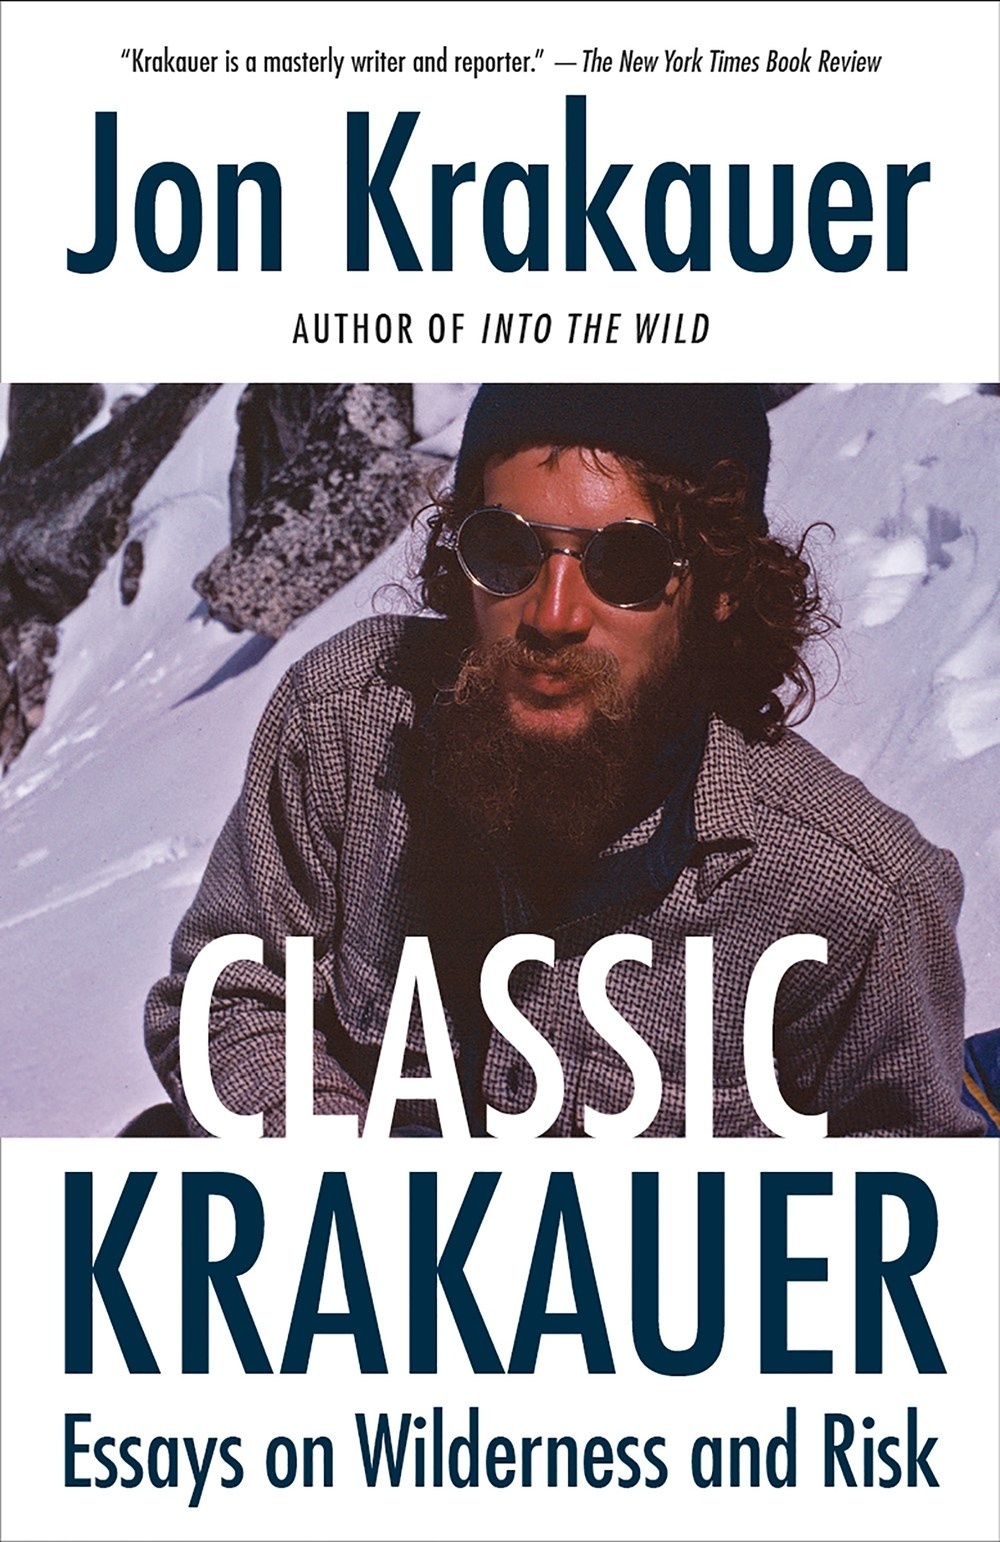 Classic Krakauer, Essays on Wilderness and Risk